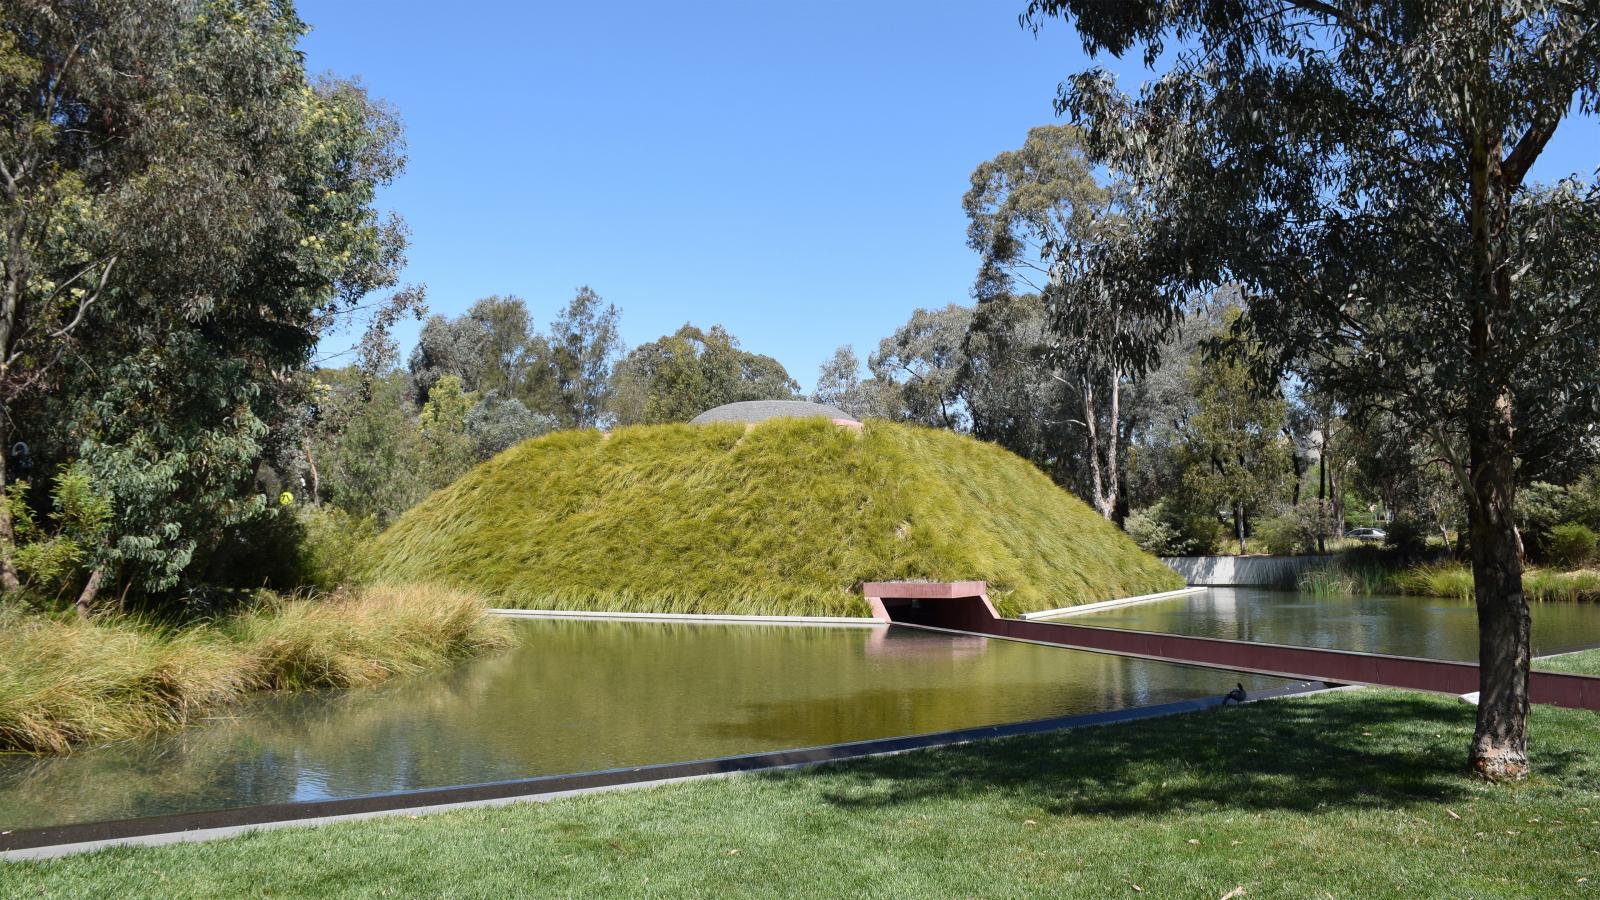 A lush, green grassy mound surrounded by a tranquil pond on a sunny day. A red bridge extends from the mound over the water in this picturesque Australian Garden. Trees and vegetation border the scene, adding a natural ambiance under a clear blue sky at NGA.